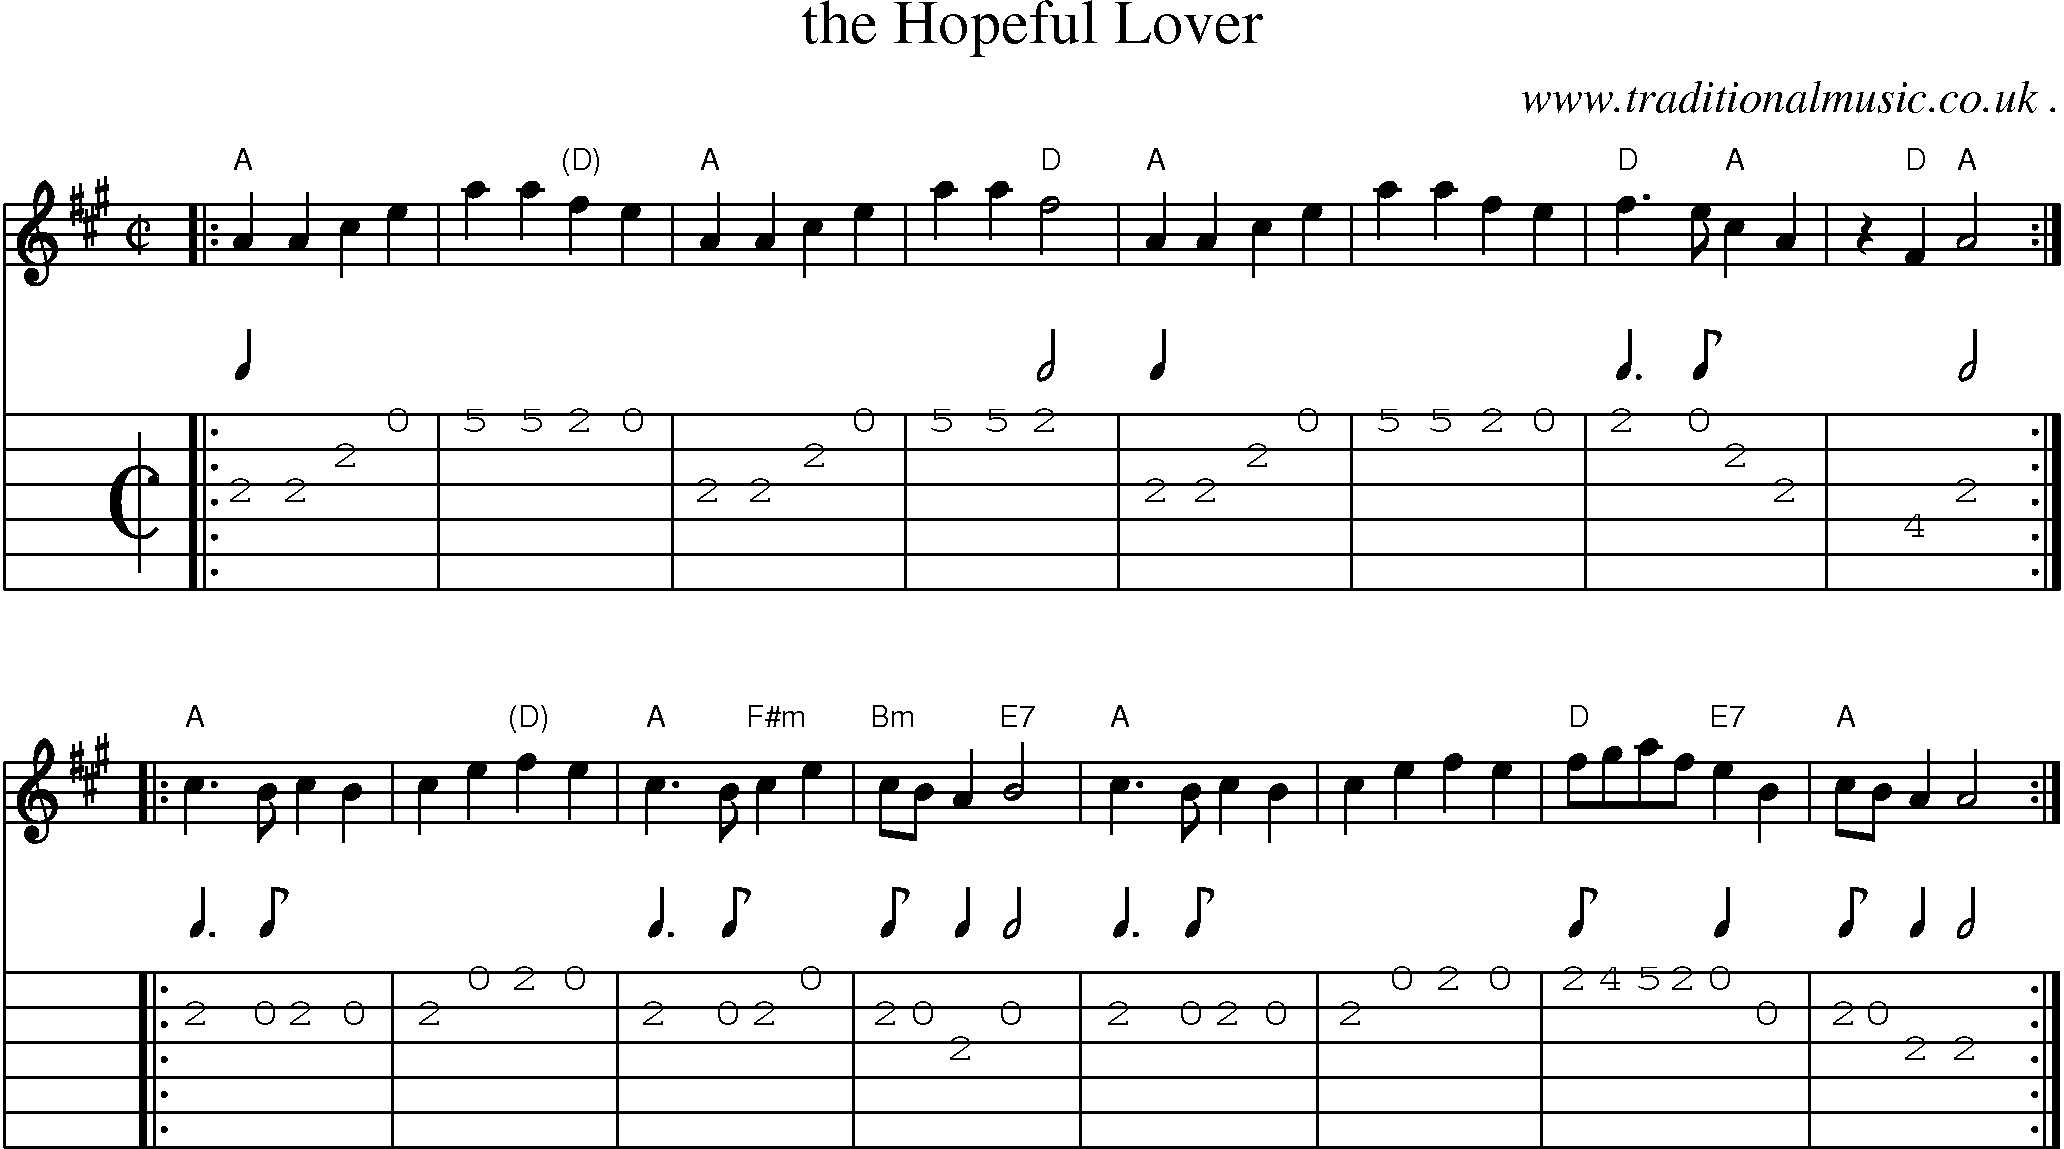 Sheet-music  score, Chords and Guitar Tabs for The Hopeful Lover